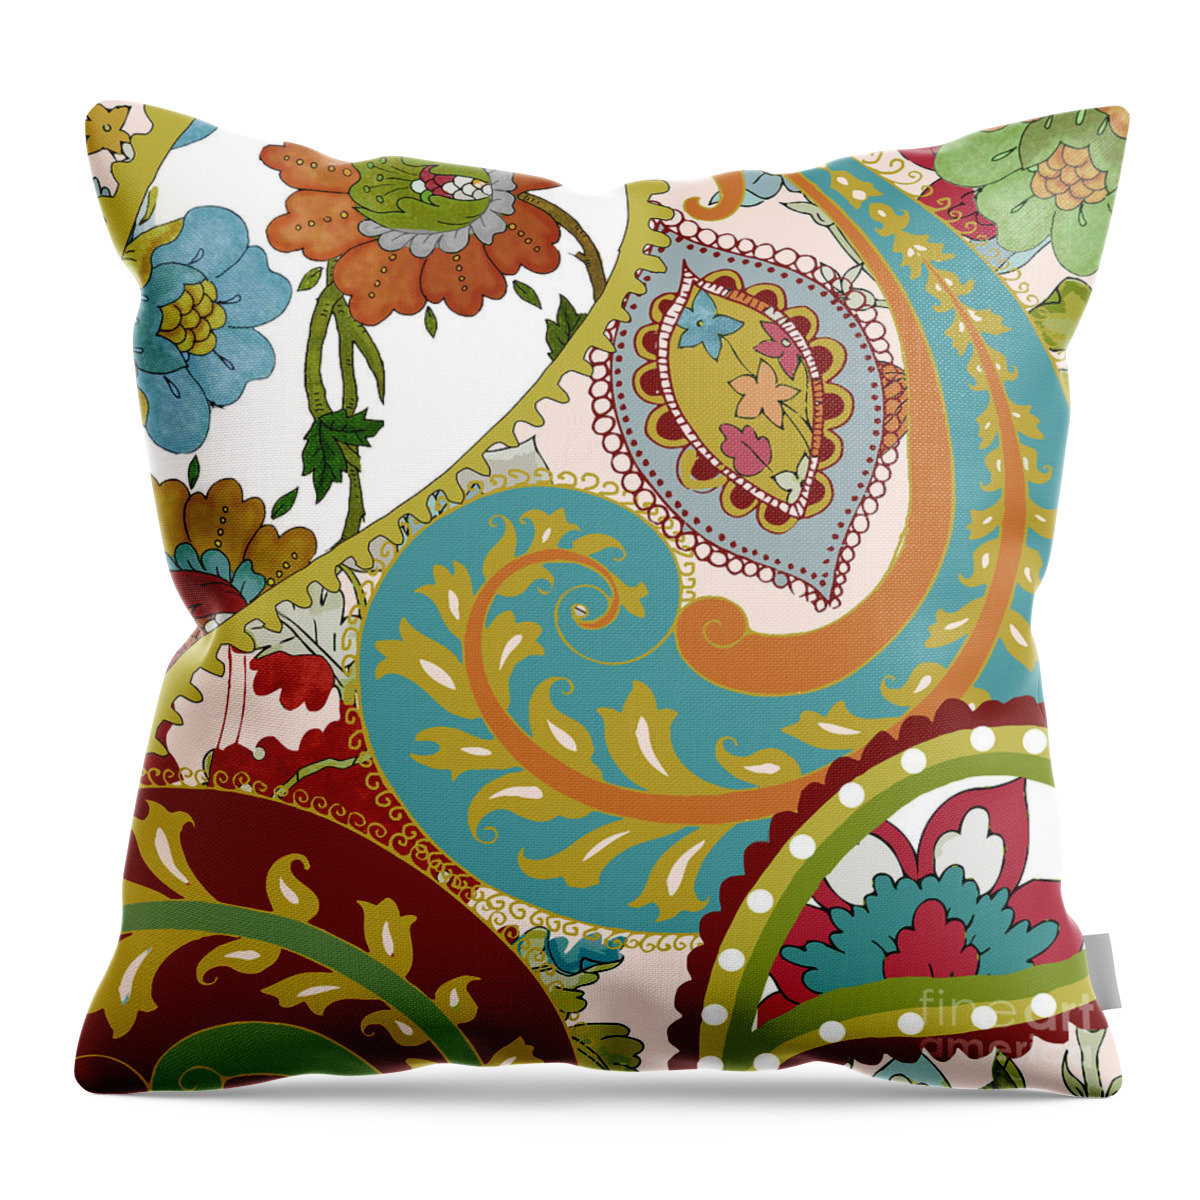 Paisley Garden Throw Pillow featuring the painting Emma's Garden II by Mindy Sommers